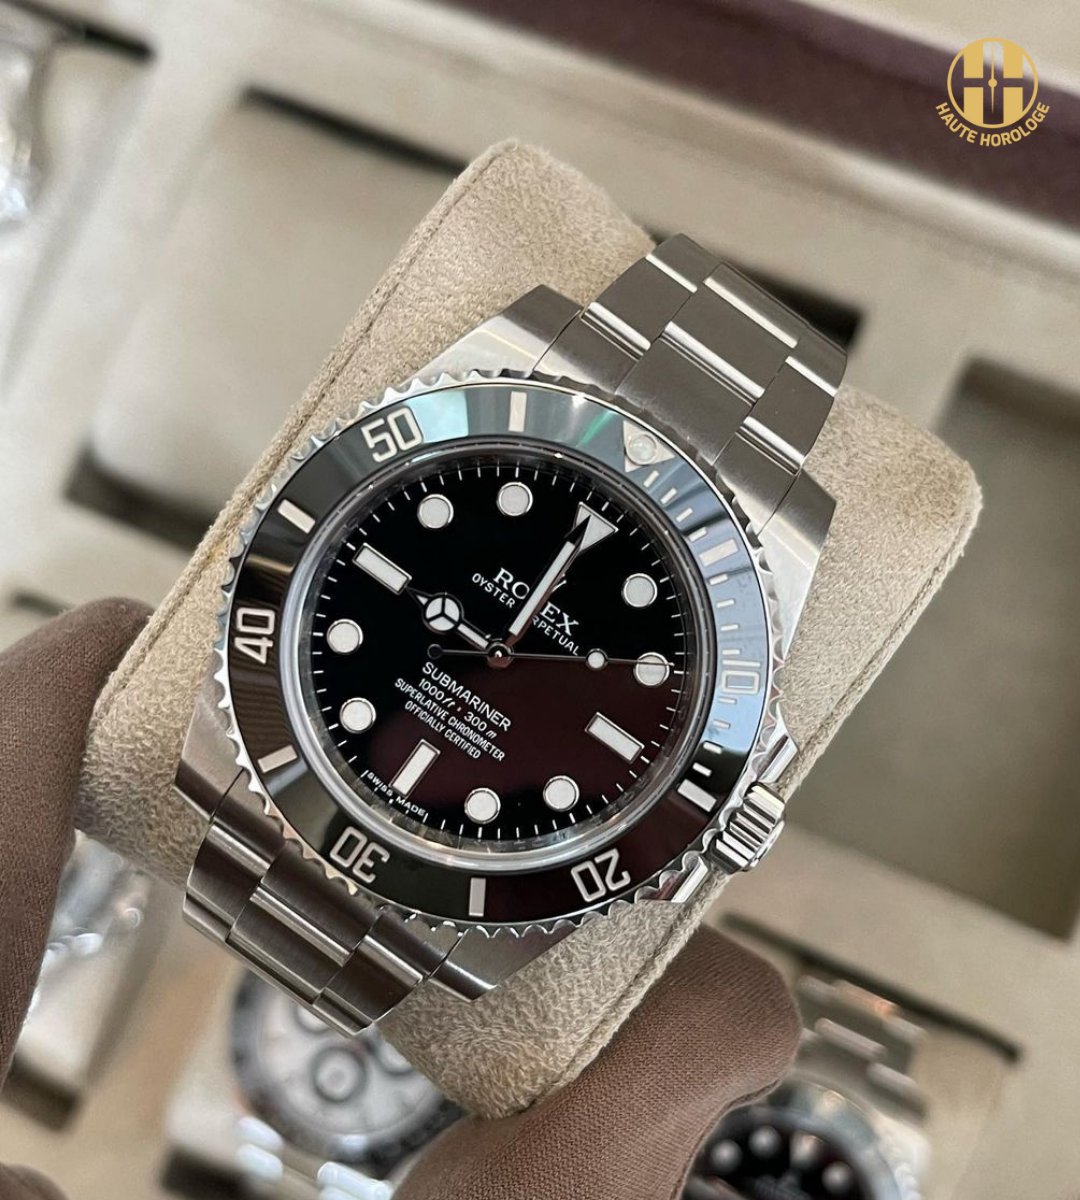 Haute Horologe on Twitter: "Buy Rolex Date Black Dial Watch from Haute Horologe. Check our website:🌐https://t.co/8sEhqFdSgN, Whatsapp/ DM #rolex #rolexwatch #rolexsubmariner #luxuryliving #watchthisspace #PreOwned #luxurylifestyle ...